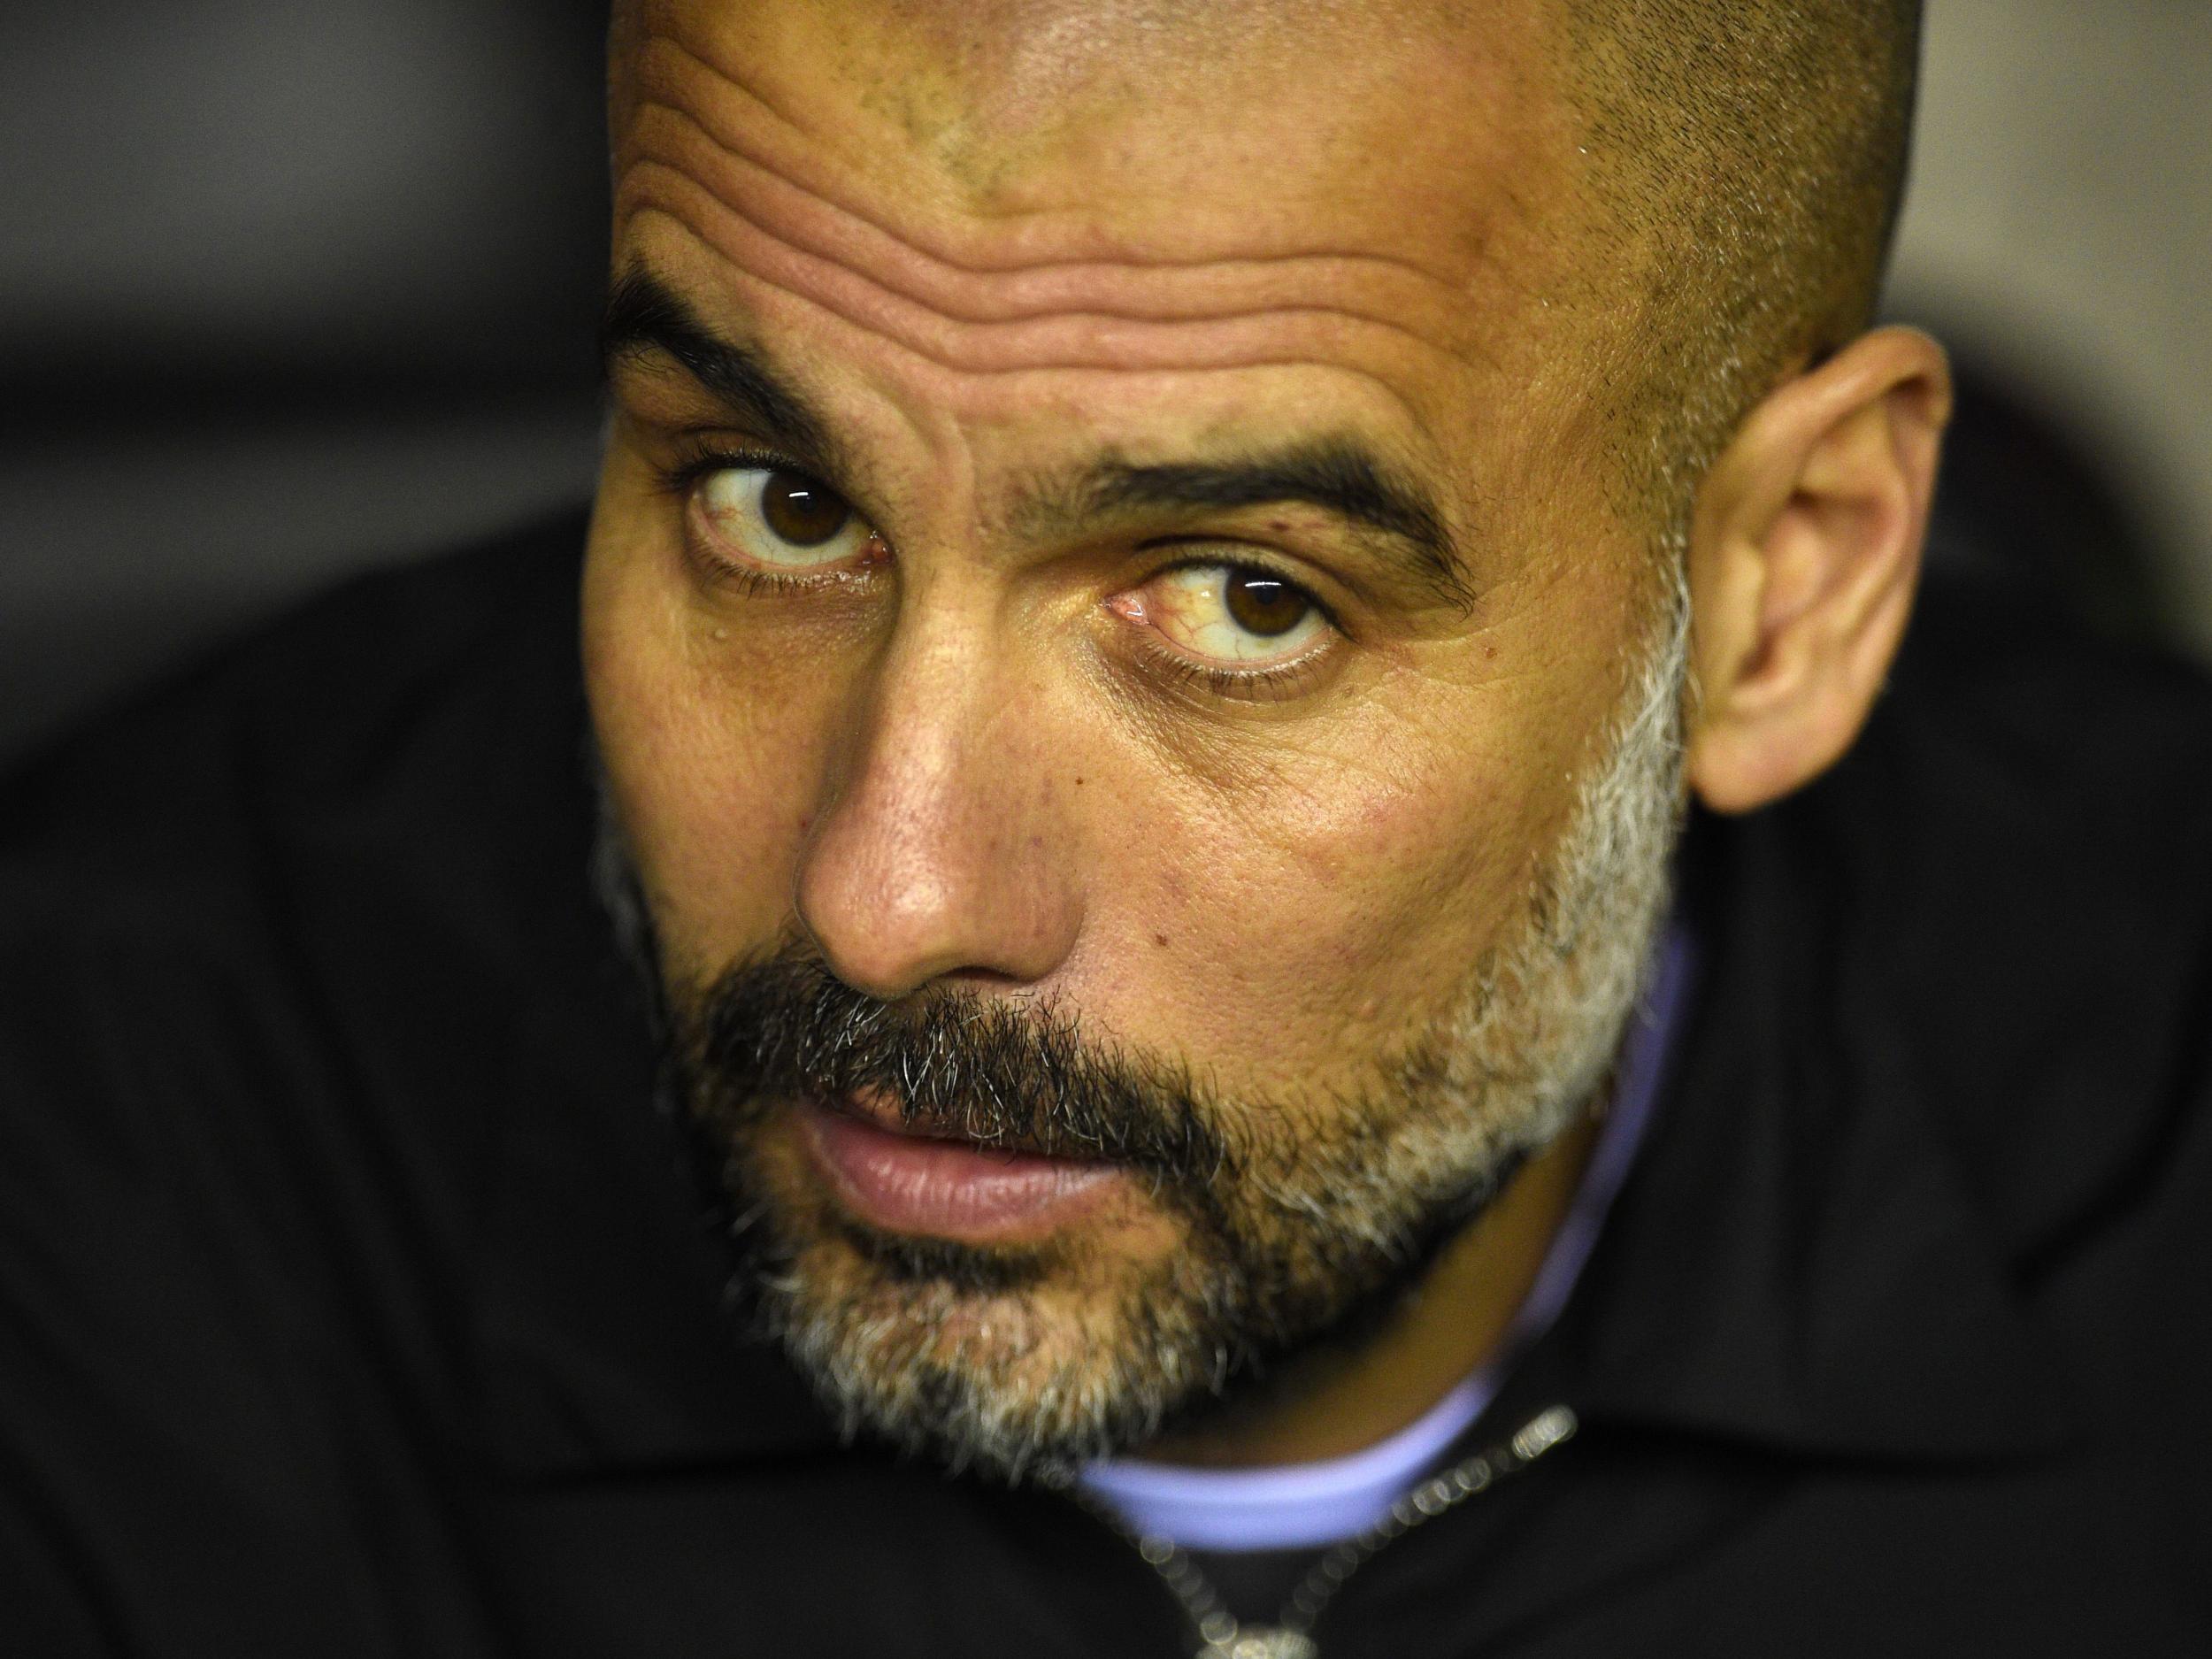 Manchester City manager Pep Guardiola claims Premier League title, not Champions League, is his priority